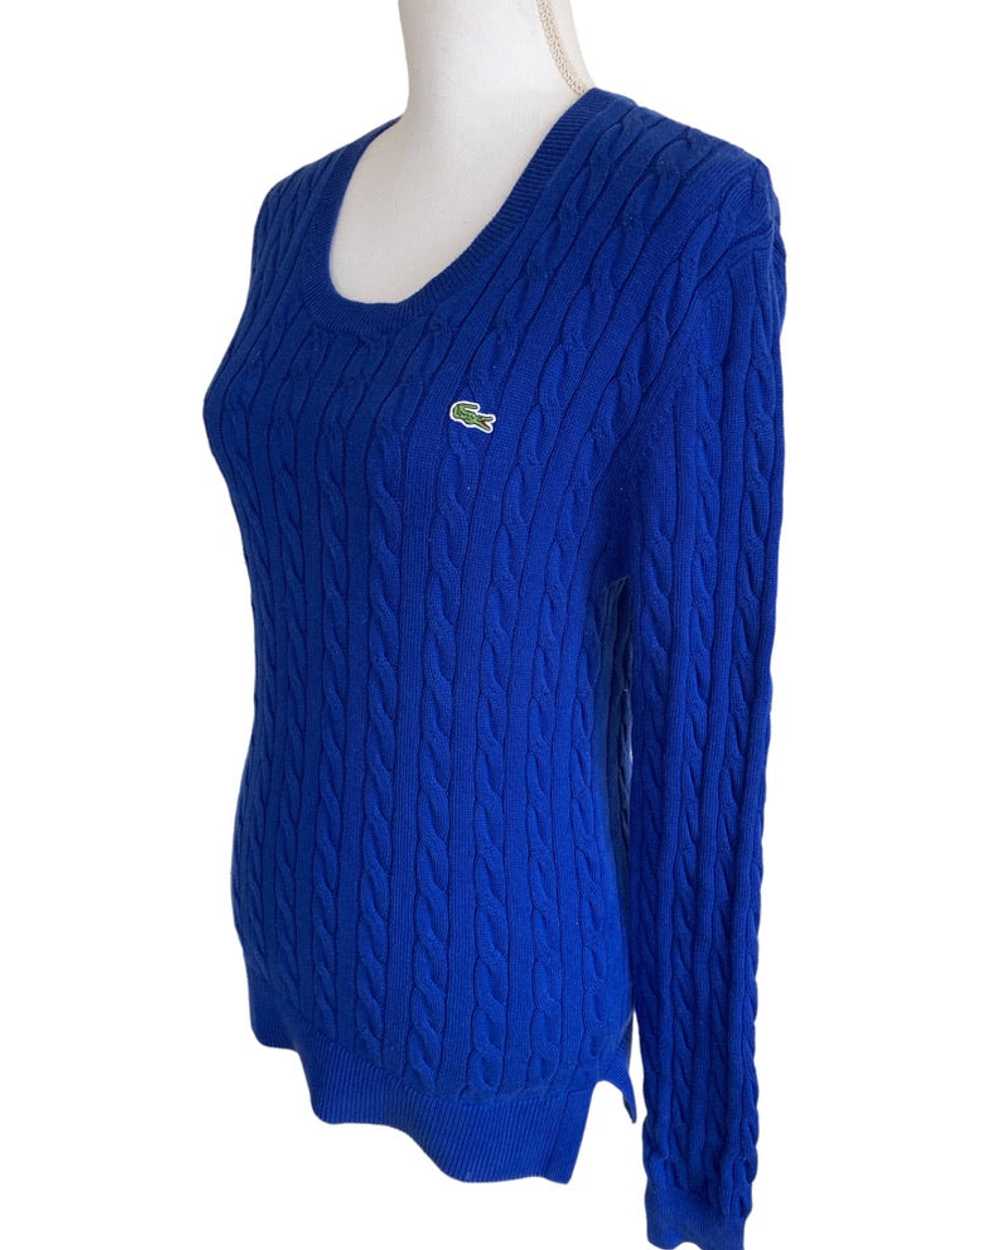 Lacoste Royal Blue Cable Knit Sweater, S - image 3